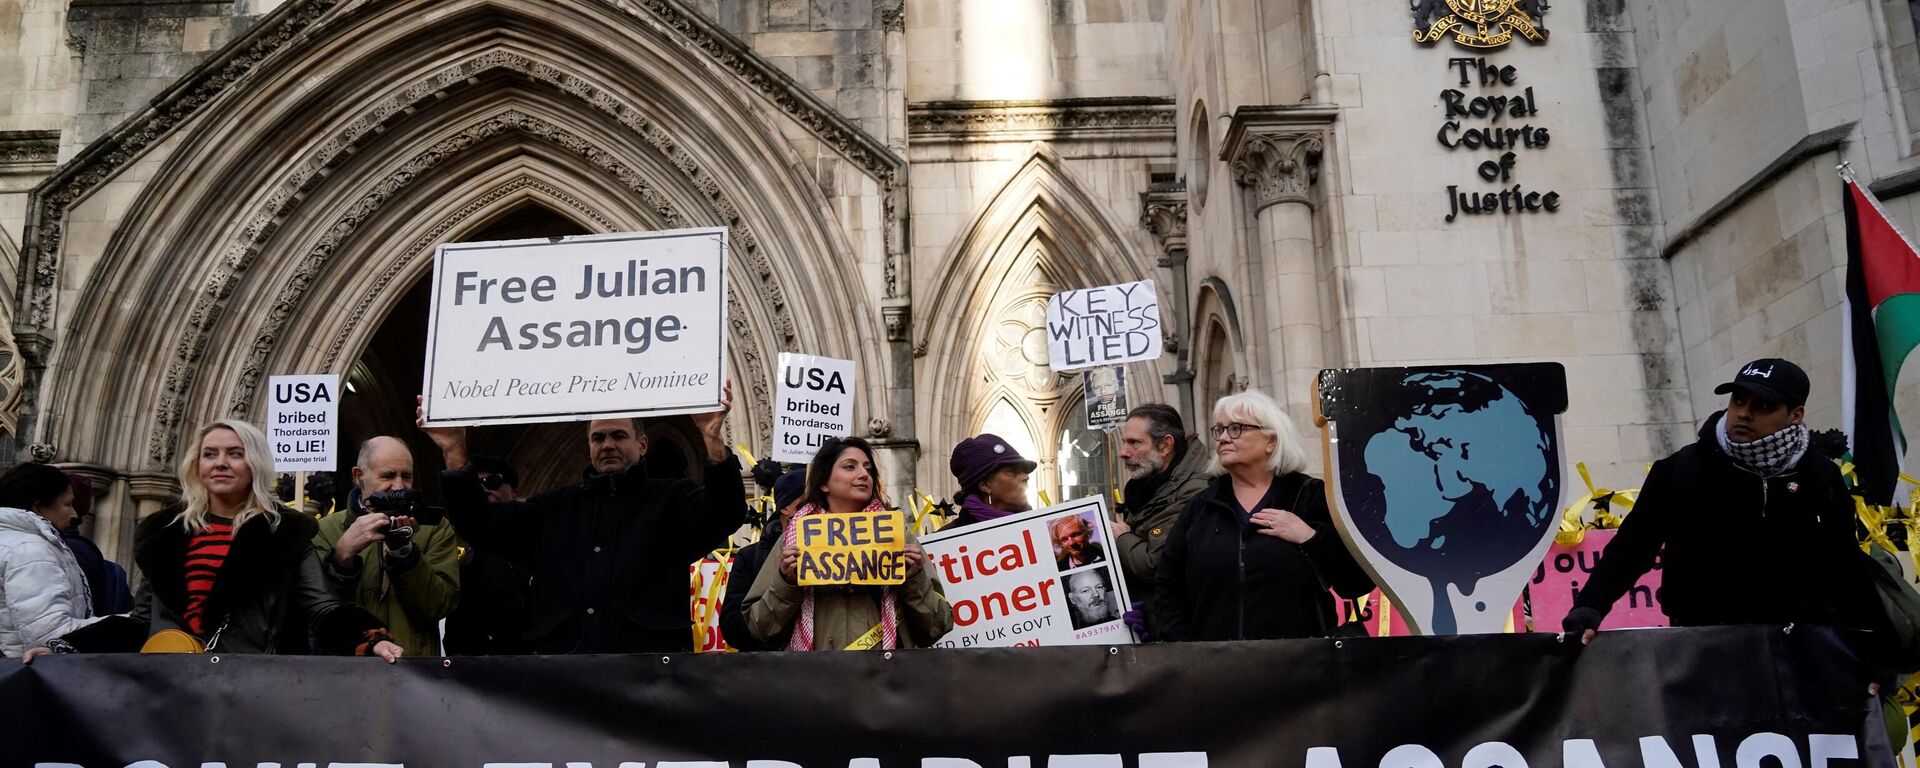 Supporters of WikiLeaks founder Julian Assange, hold placards outside the Royal Courts of Justice in London on December 10, 2021.  - Sputnik International, 1920, 10.12.2021